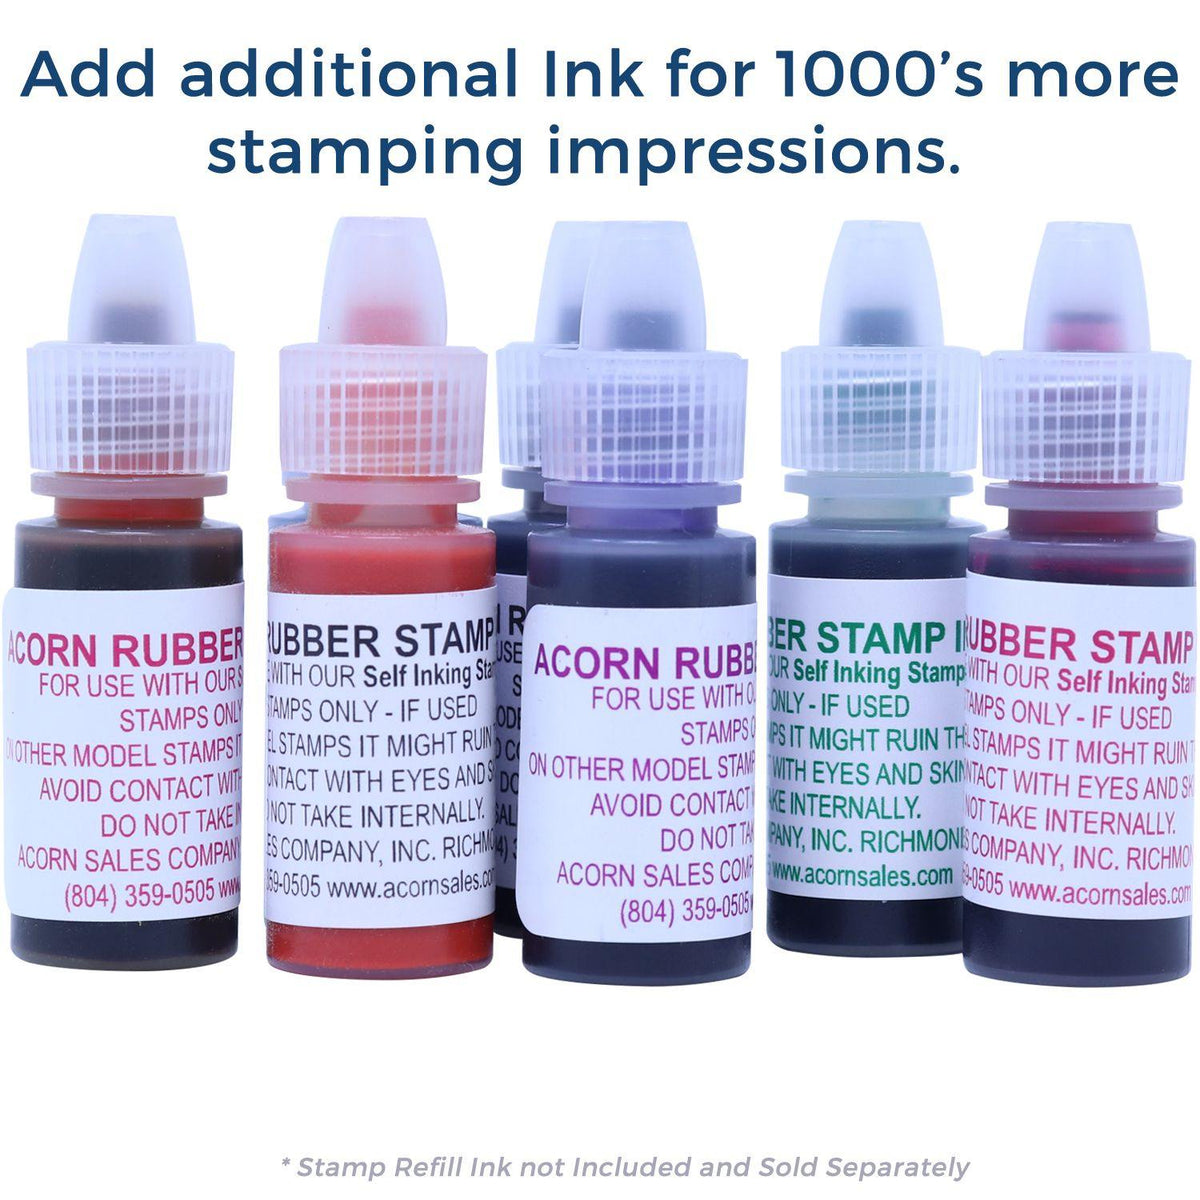 Refill Inks for Large Pre-Inked Media Mail Stamp Available